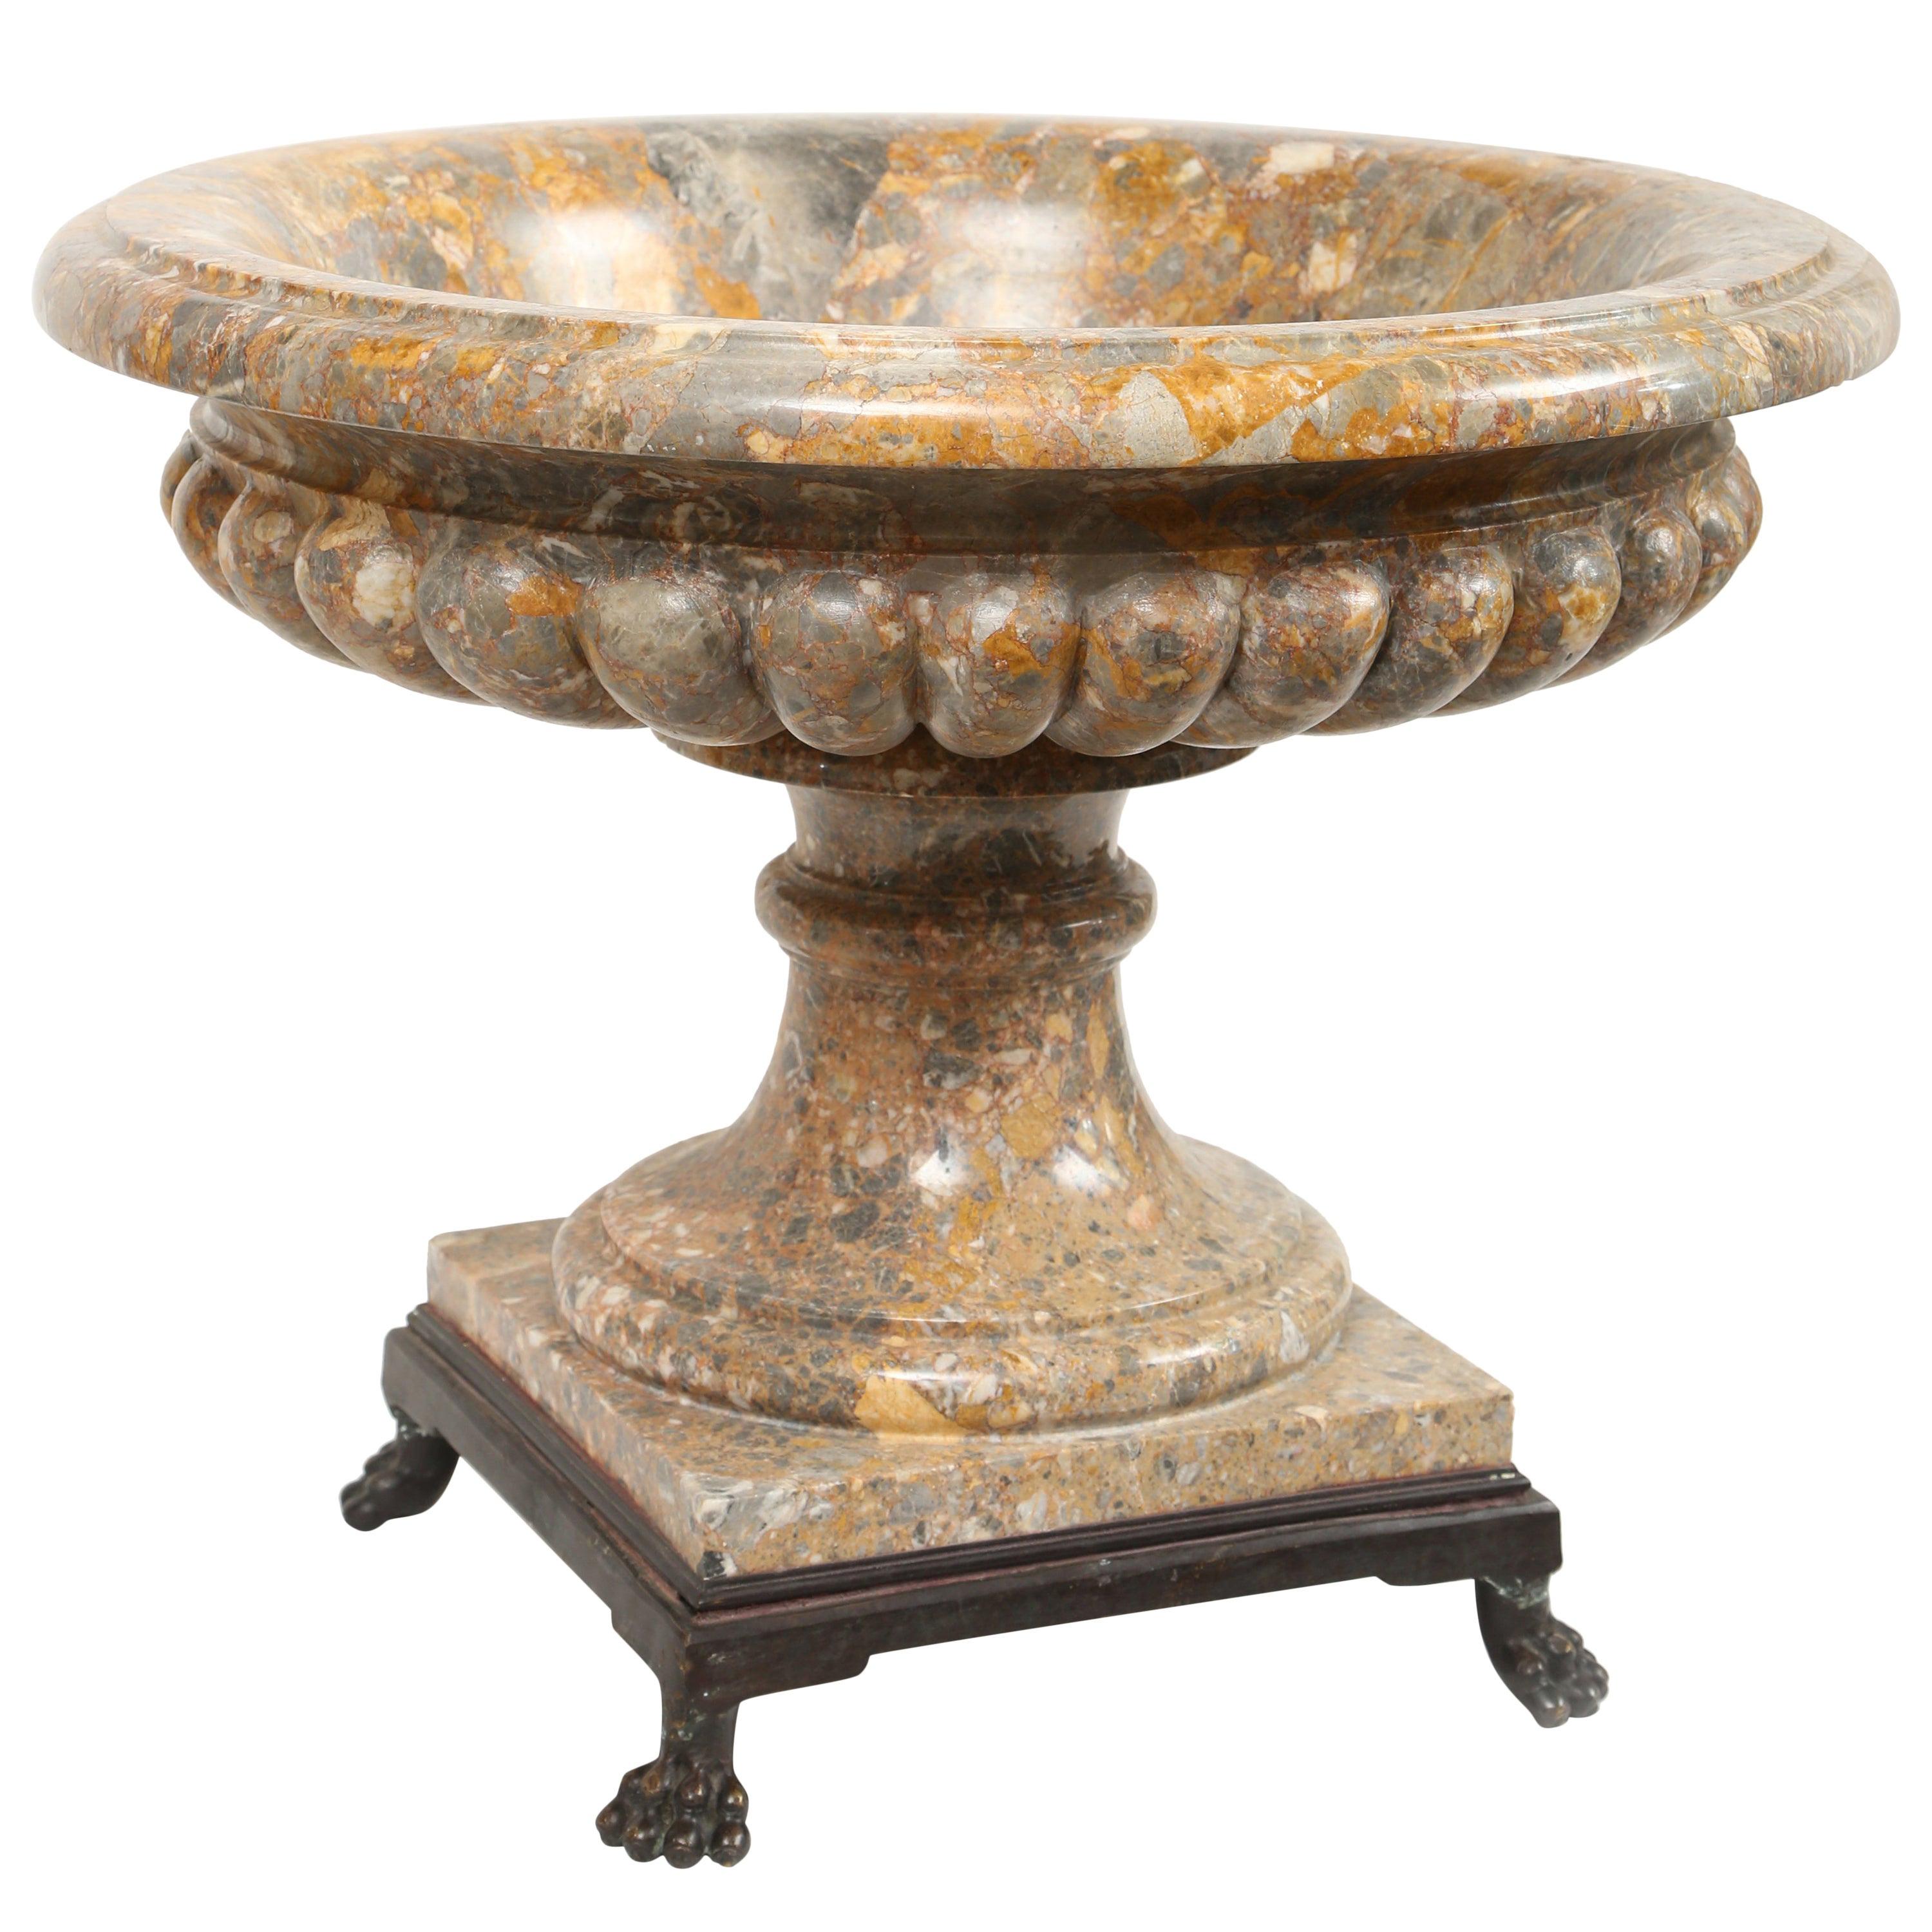 Marble NeoClassical Urn/Tazza on Iron Base with Lion's Paw Feet